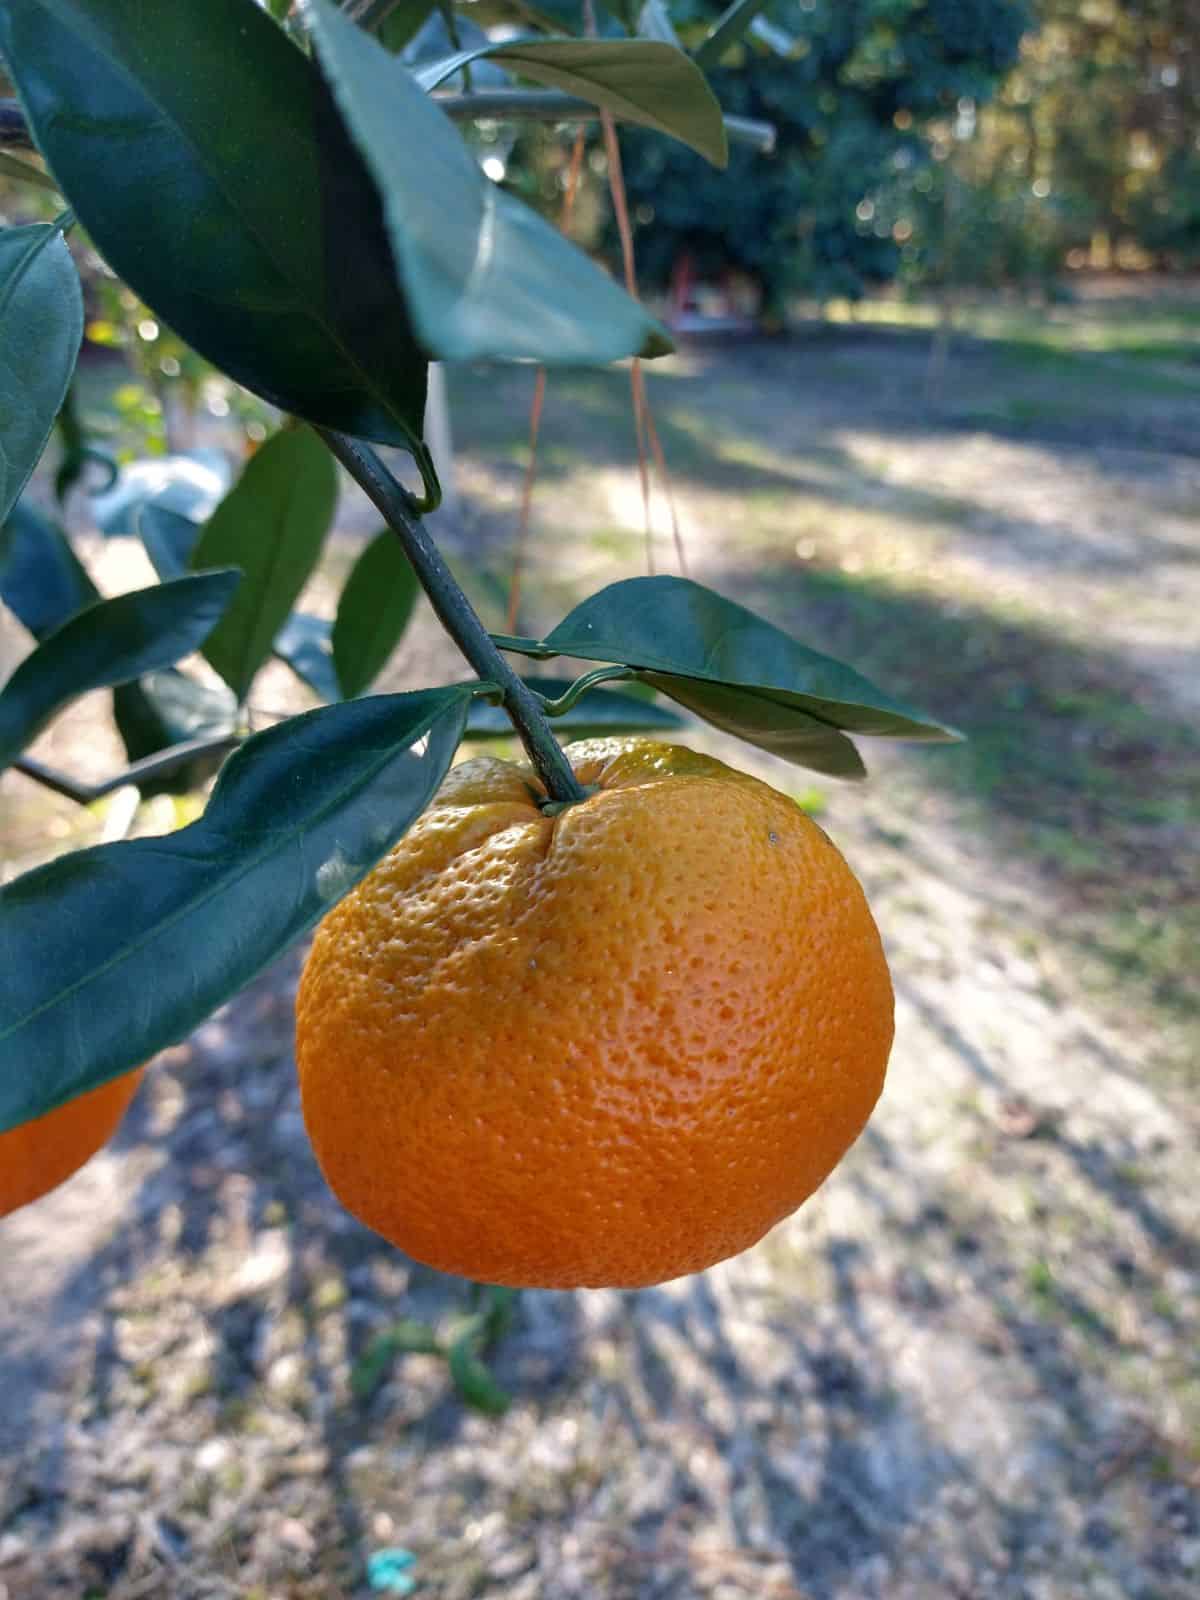 A photo of focused in on a single Satsuma mandarin growing in a tree.